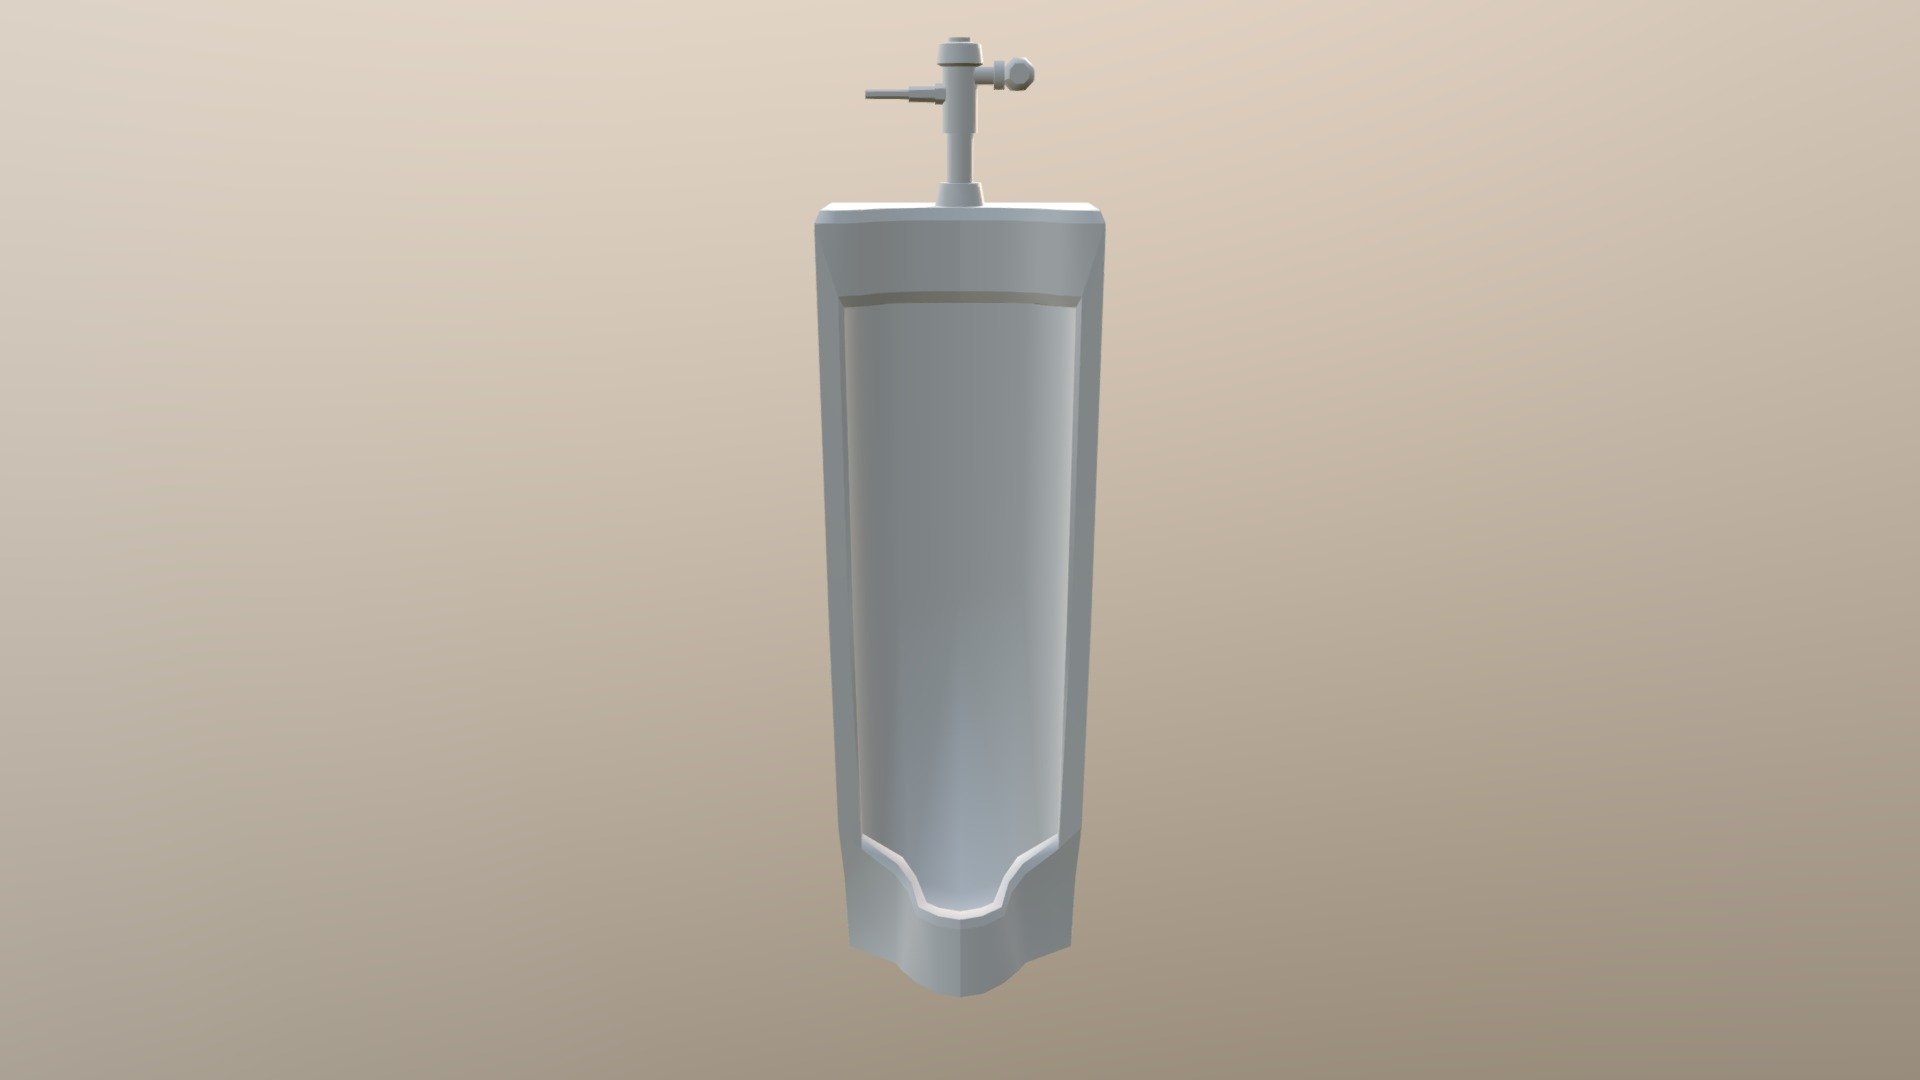 A basic cheap urinal.

This model is free to download.

As for most of the models shown you will need to animate and texture yourself. Why not try it out.

This model would also look great in the Sims 3 and Sims 4 plus Garry’s Mod although I am not really a person who can port models into games as I find this difficult at this moment and time 3d model